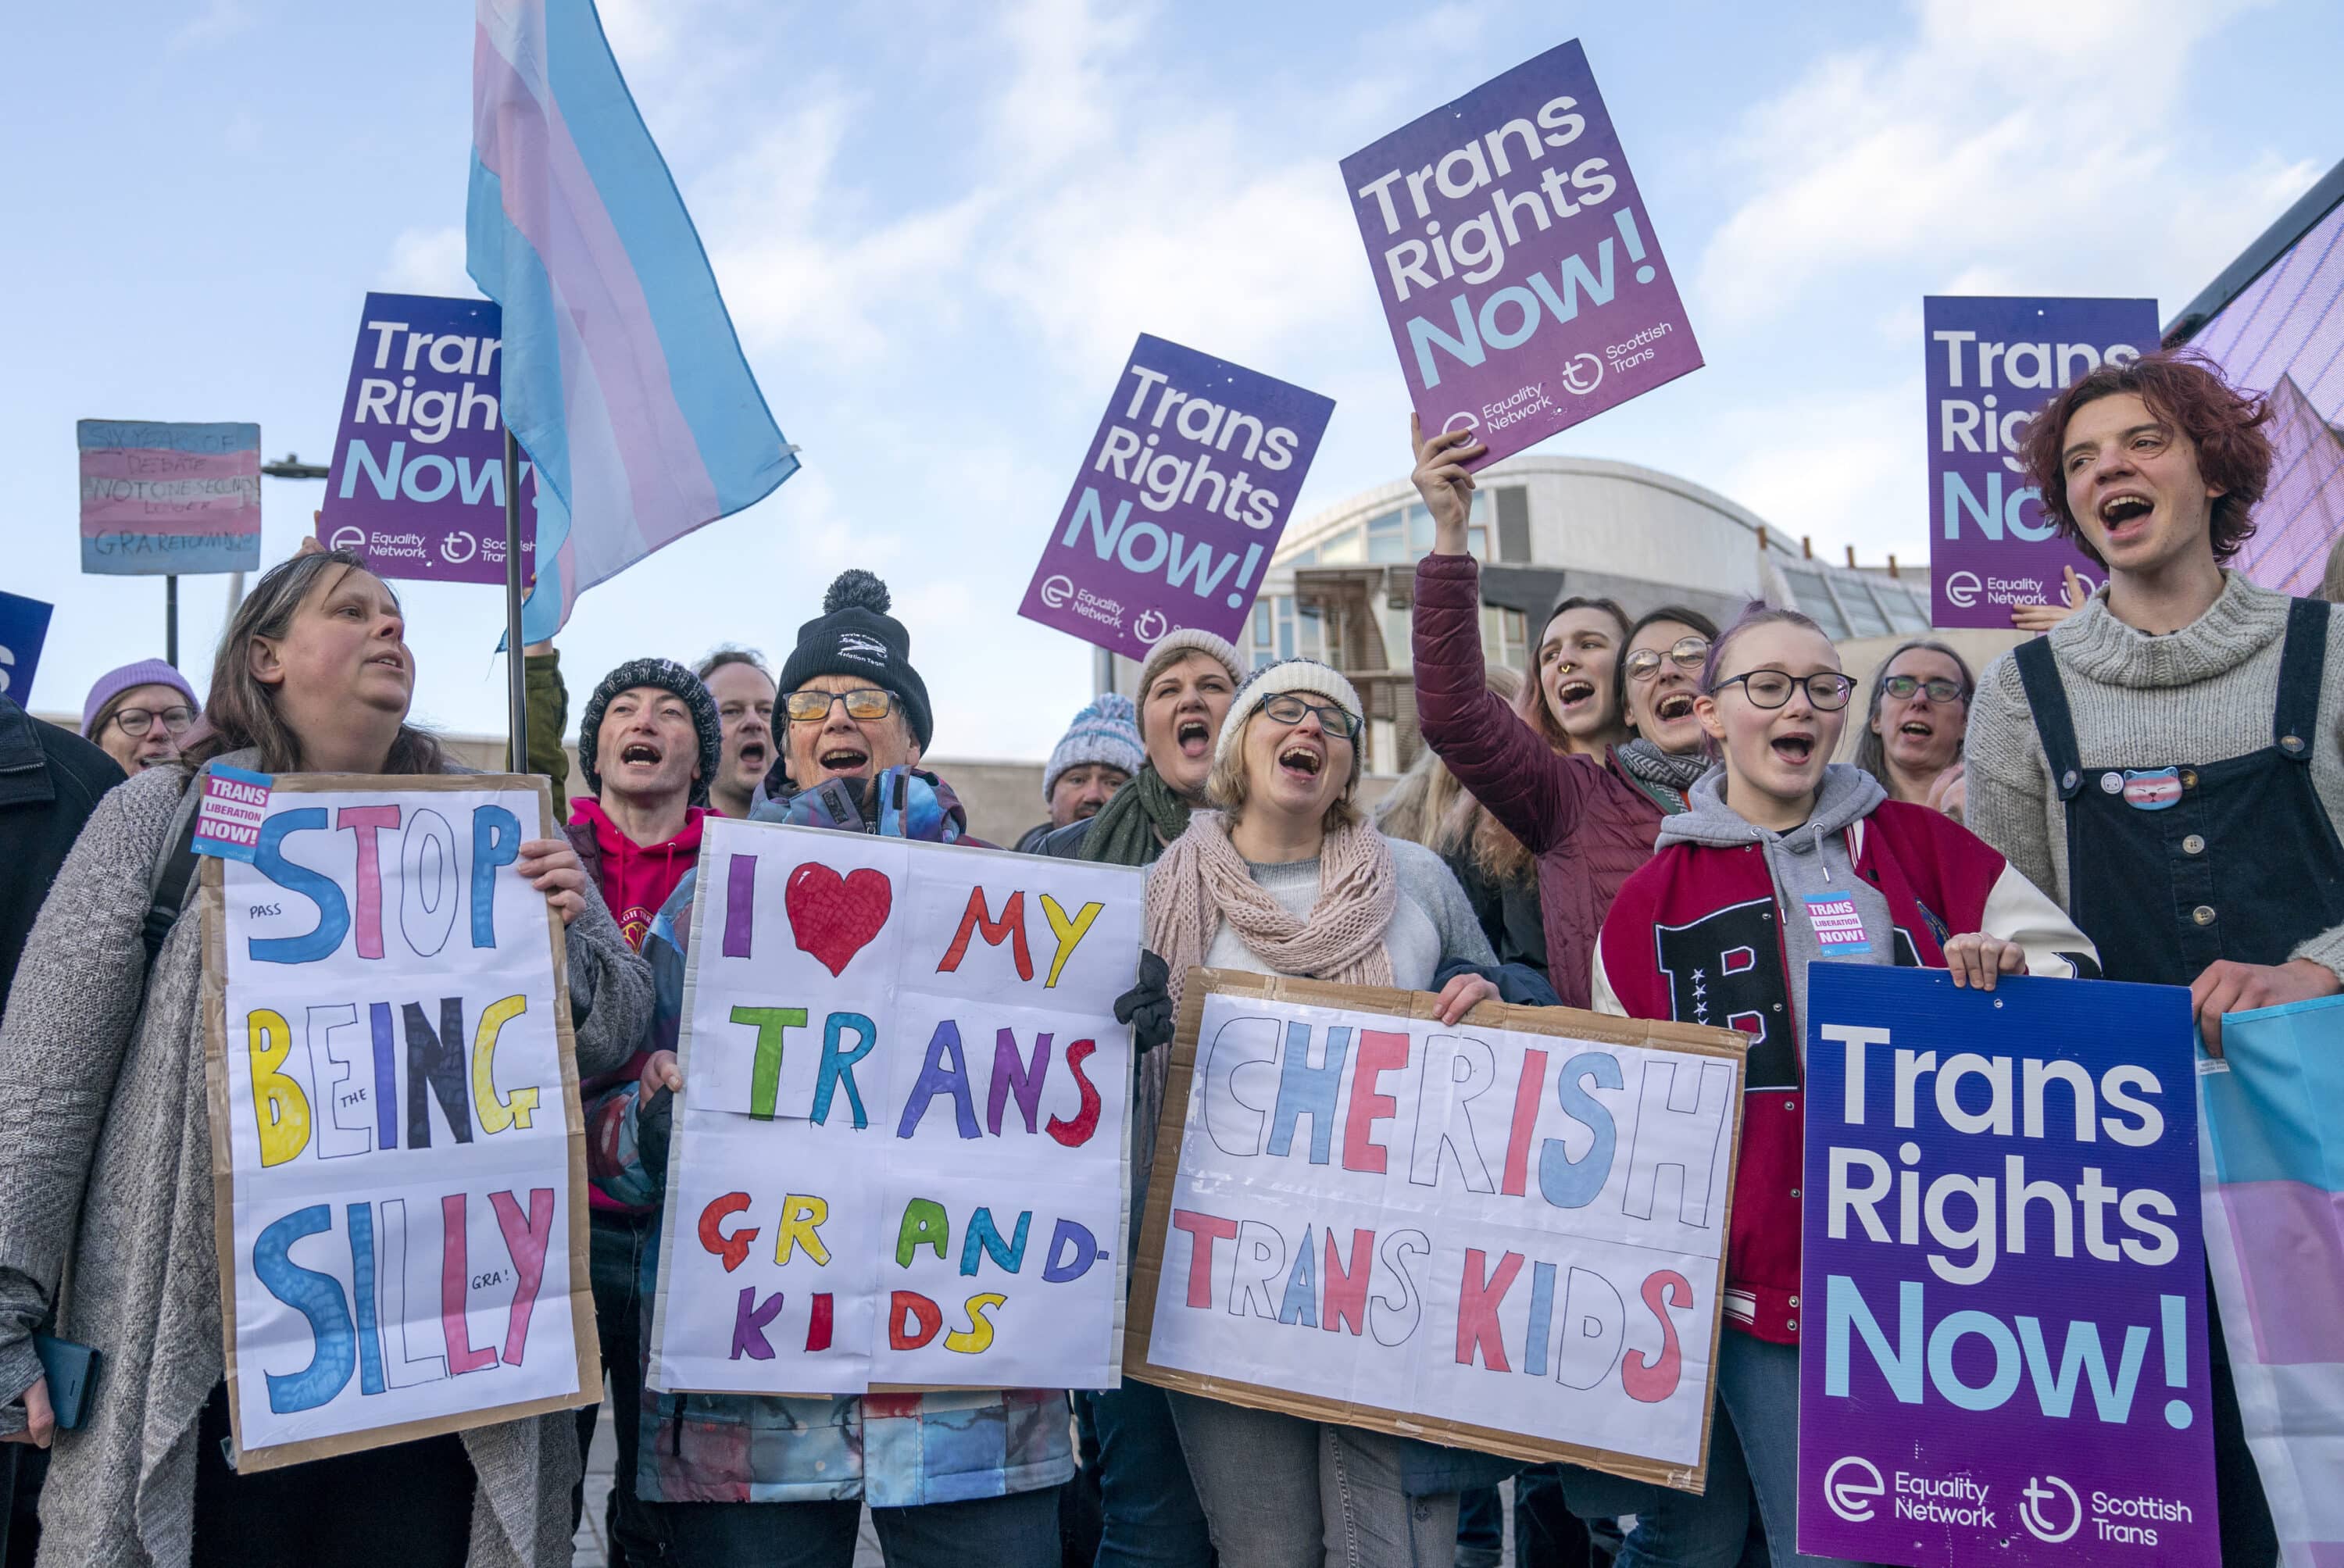 Veto Of Scottish Transgender Rights Bill Sparks Constitutional Crisis Courthouse News Service 8193